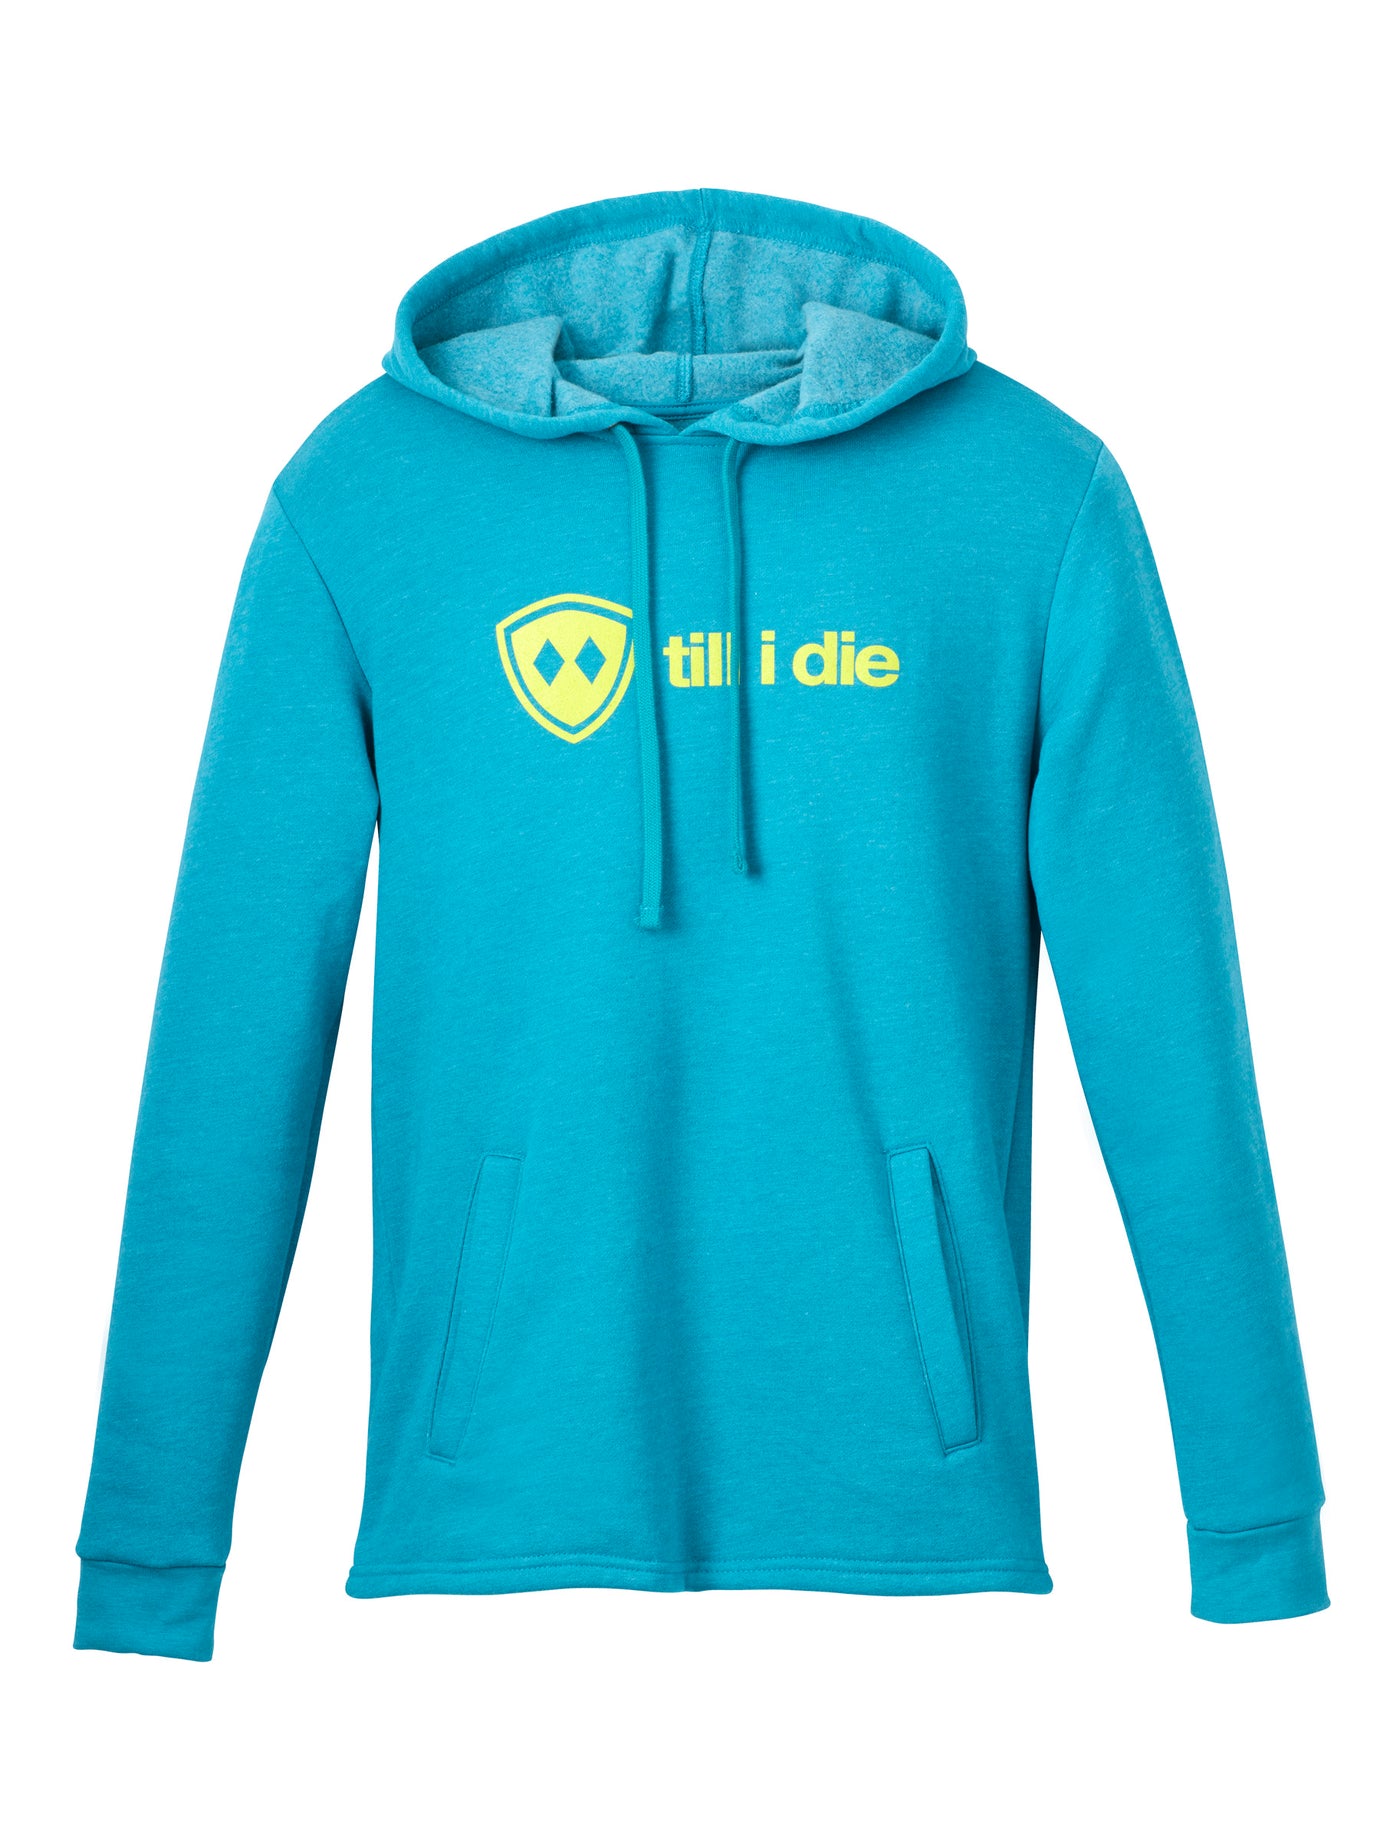 Girl laughing in a blue hoodie with Till I Die printed on it